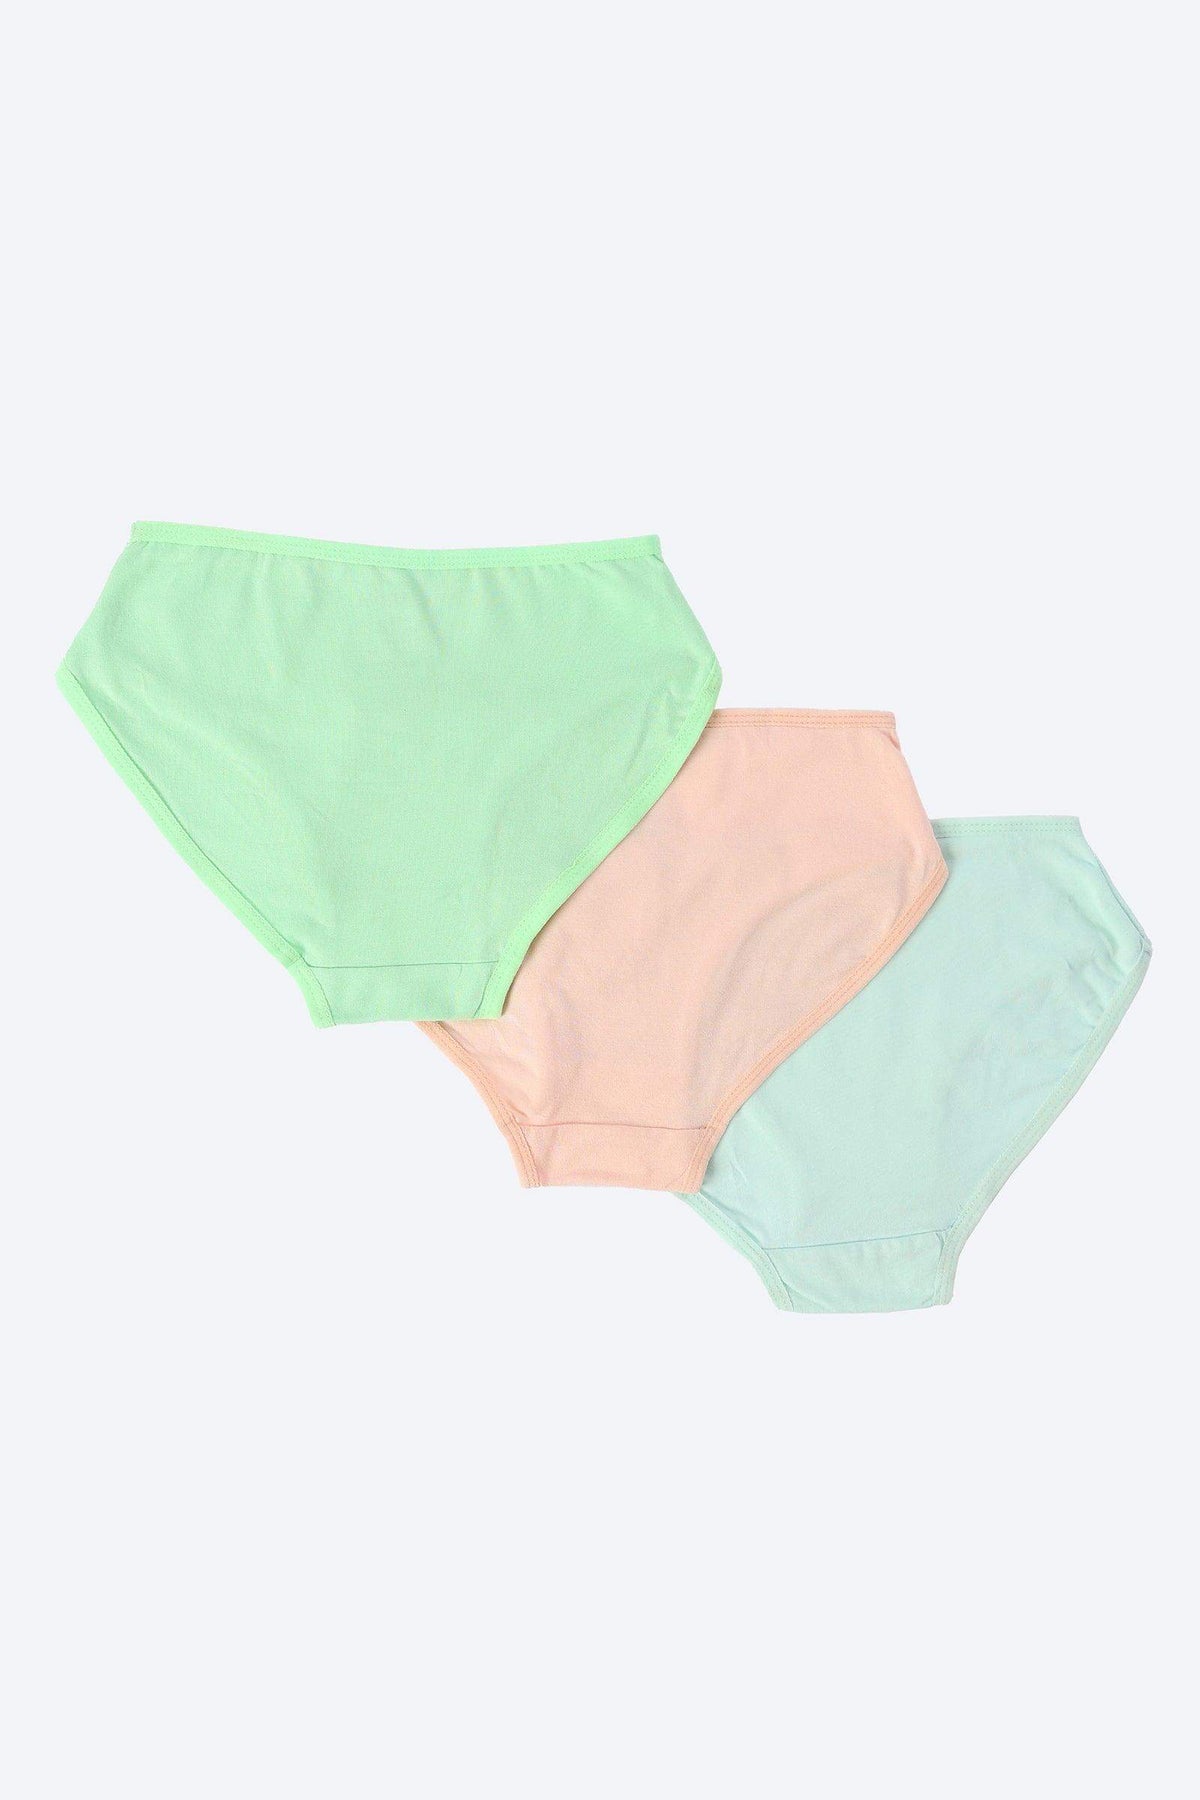 Matalan Women 3 Pack Jacquard Full Knickers - Size 10 price in Egypt